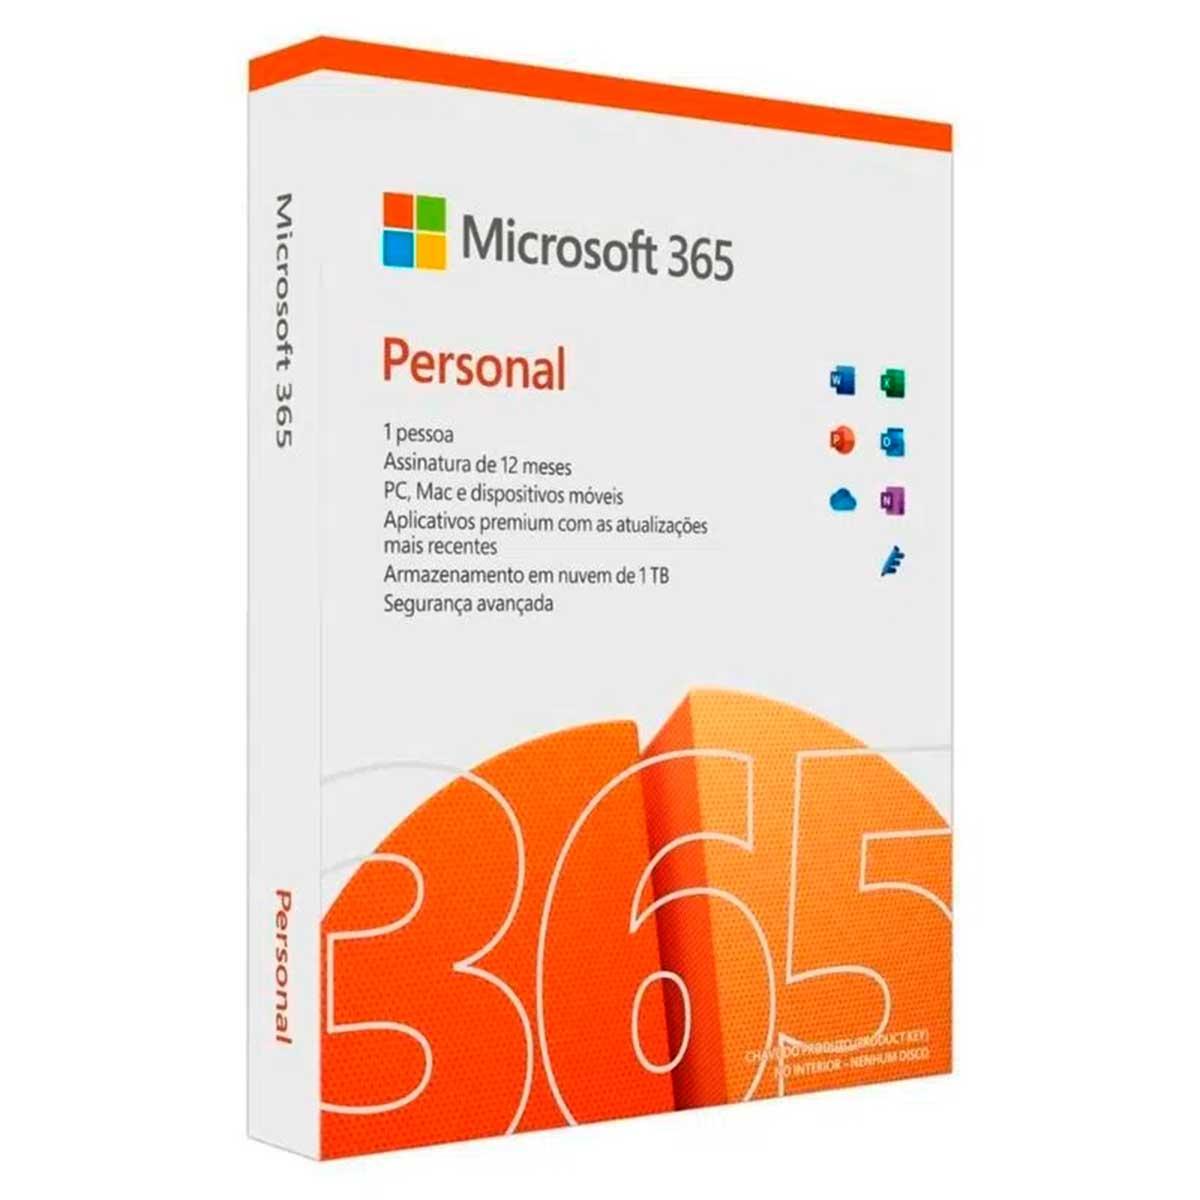 [Carre4] Office 365 Personal R$79,00